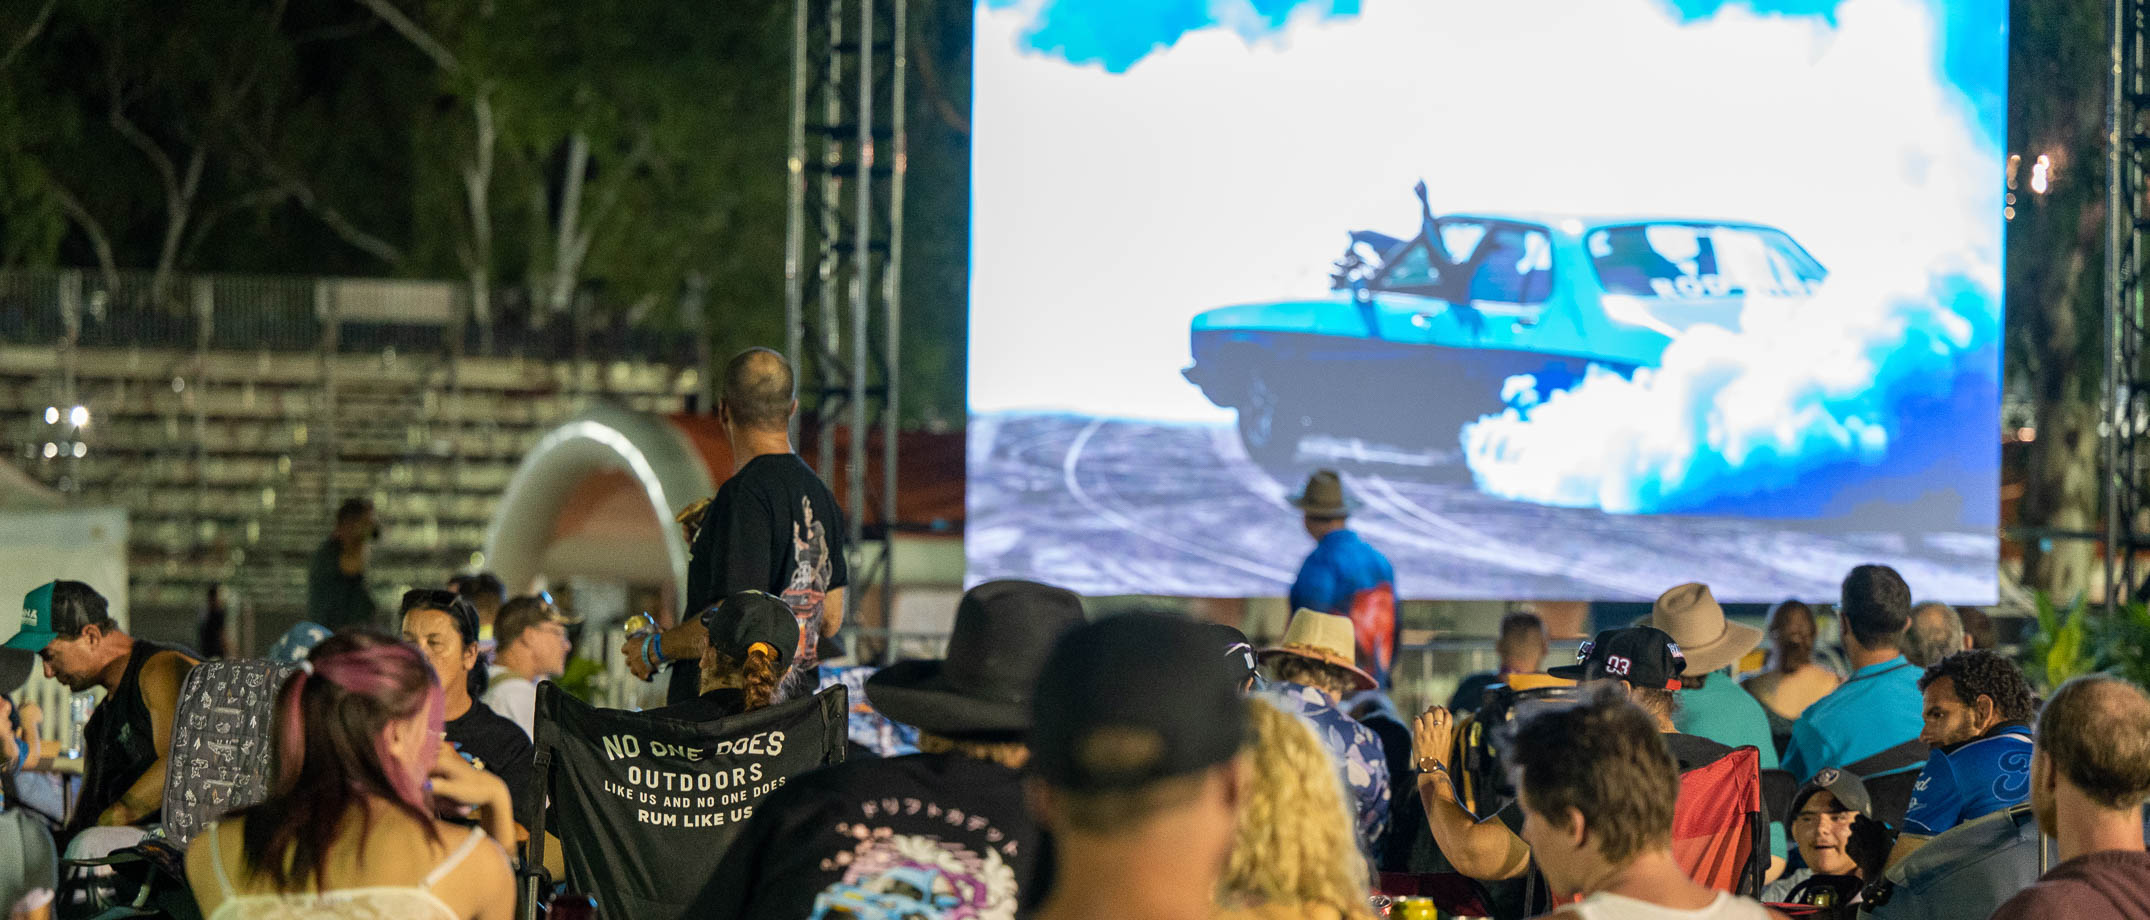 Patrons watching burnouts on the big screen at the Burnout Zone